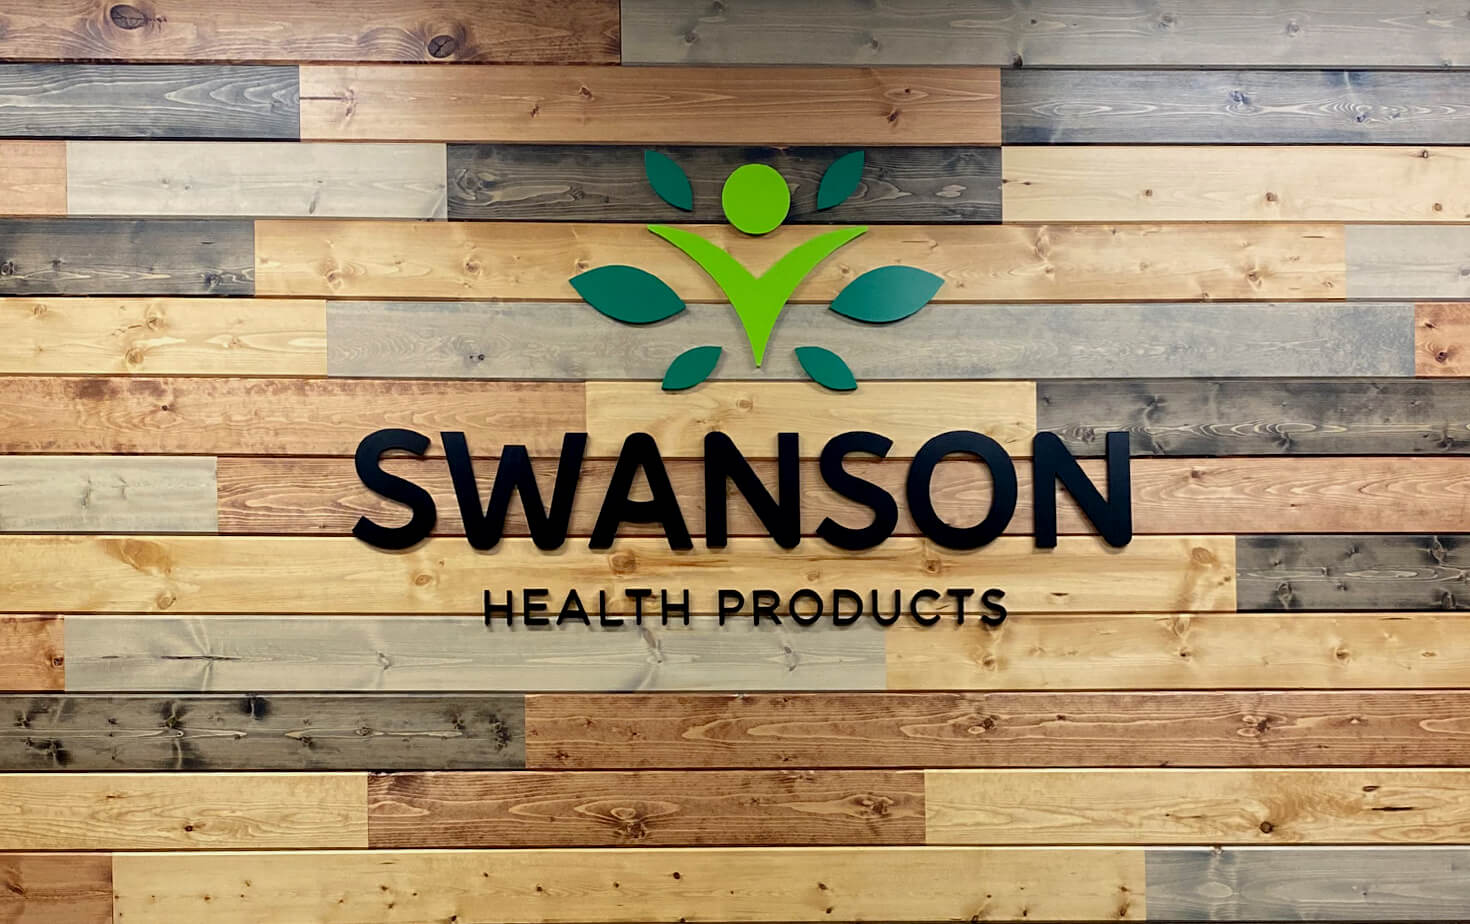 Swanson Health Products Interior Logo on Wood Wall